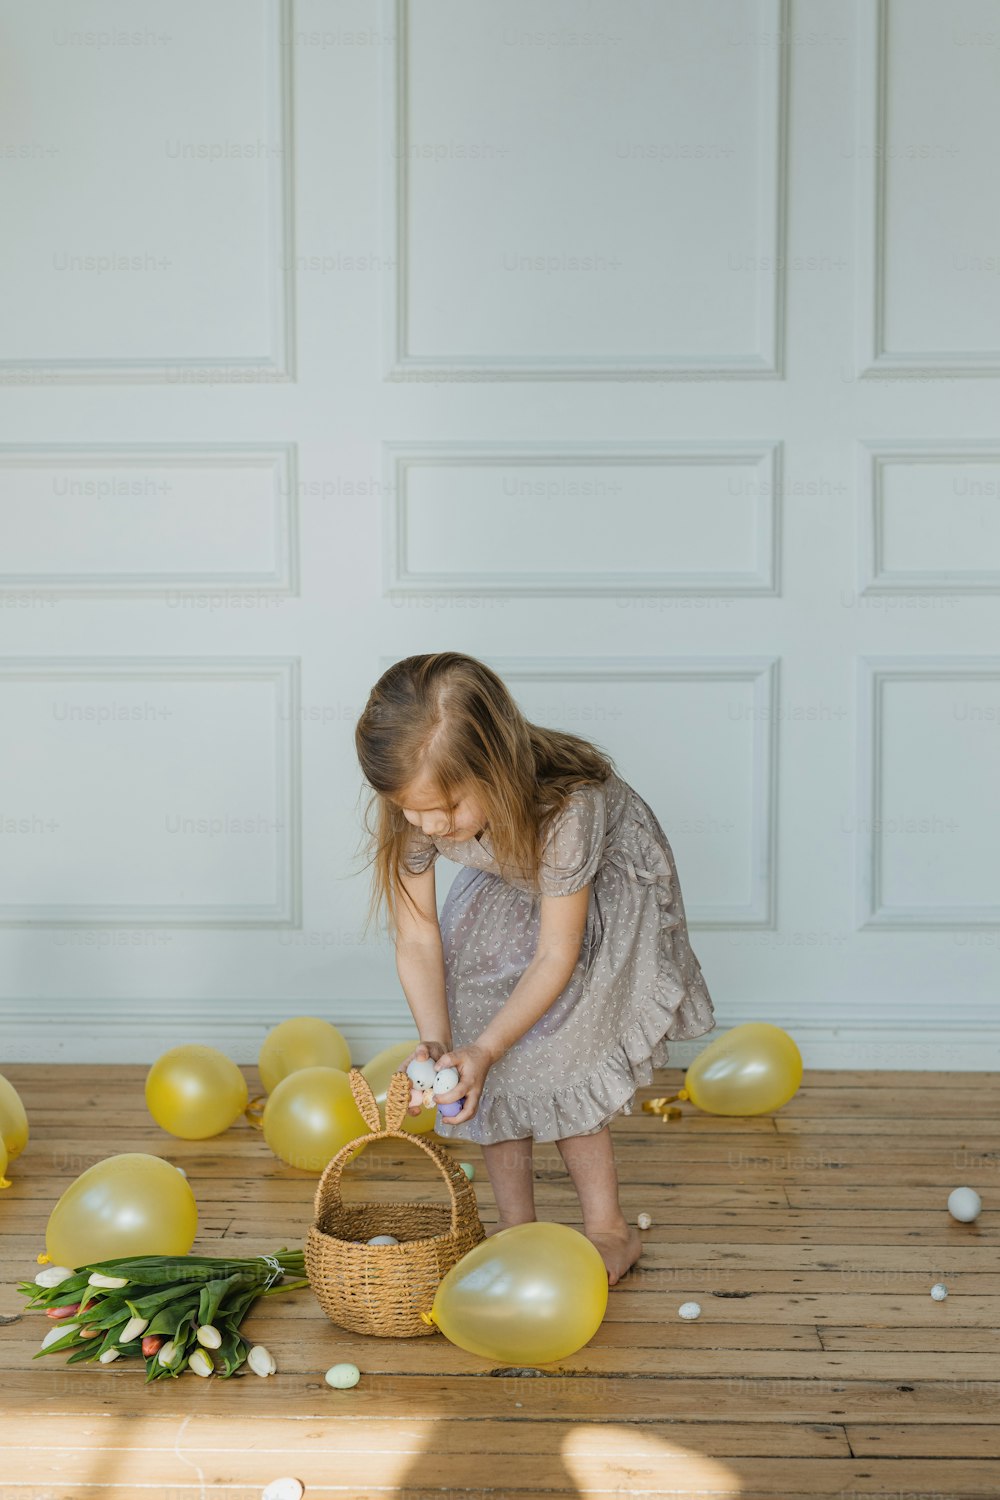 a little girl standing next to a basket filled with balloons